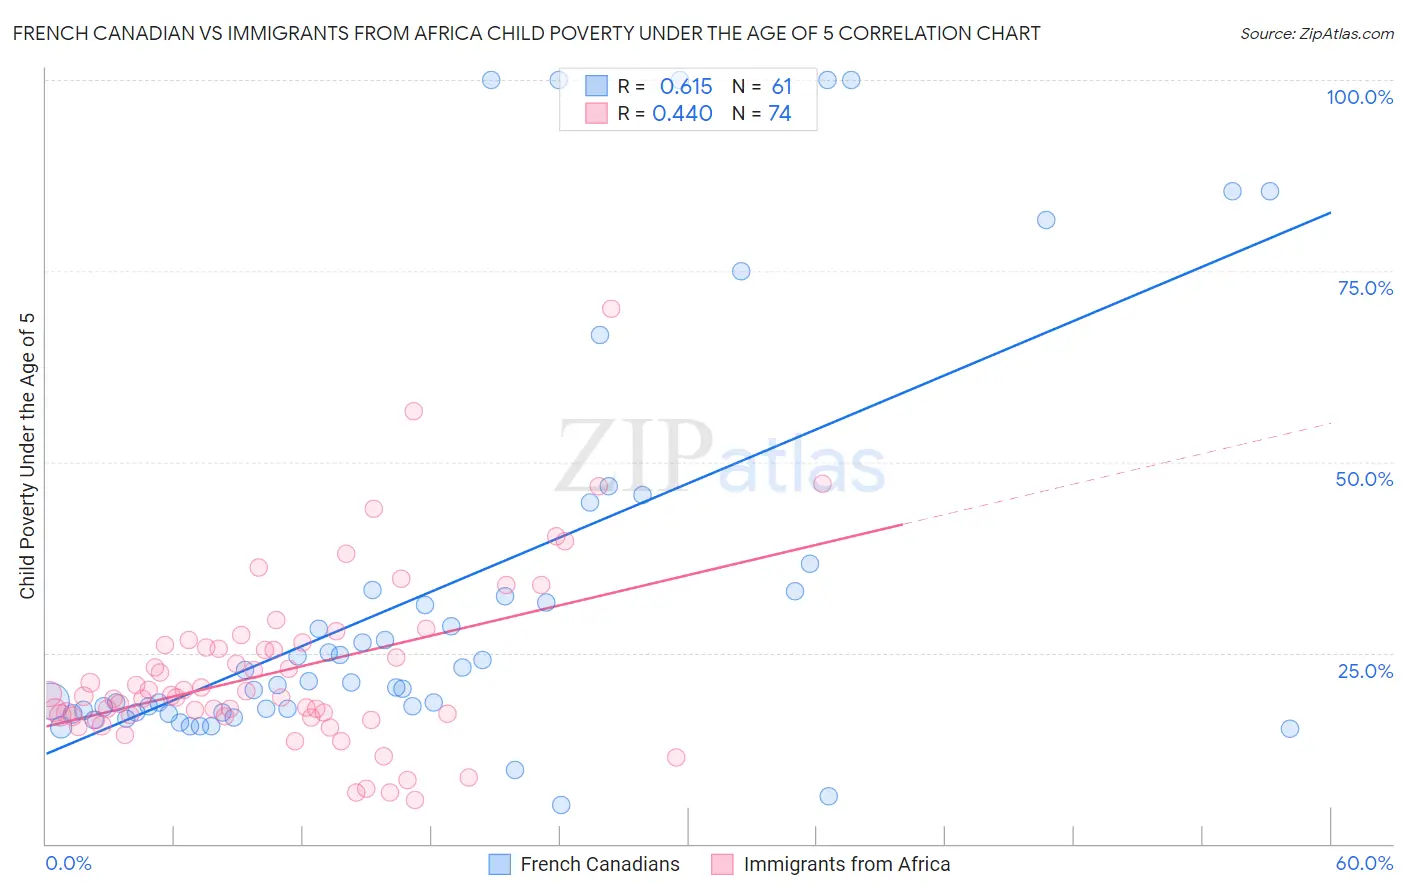 French Canadian vs Immigrants from Africa Child Poverty Under the Age of 5